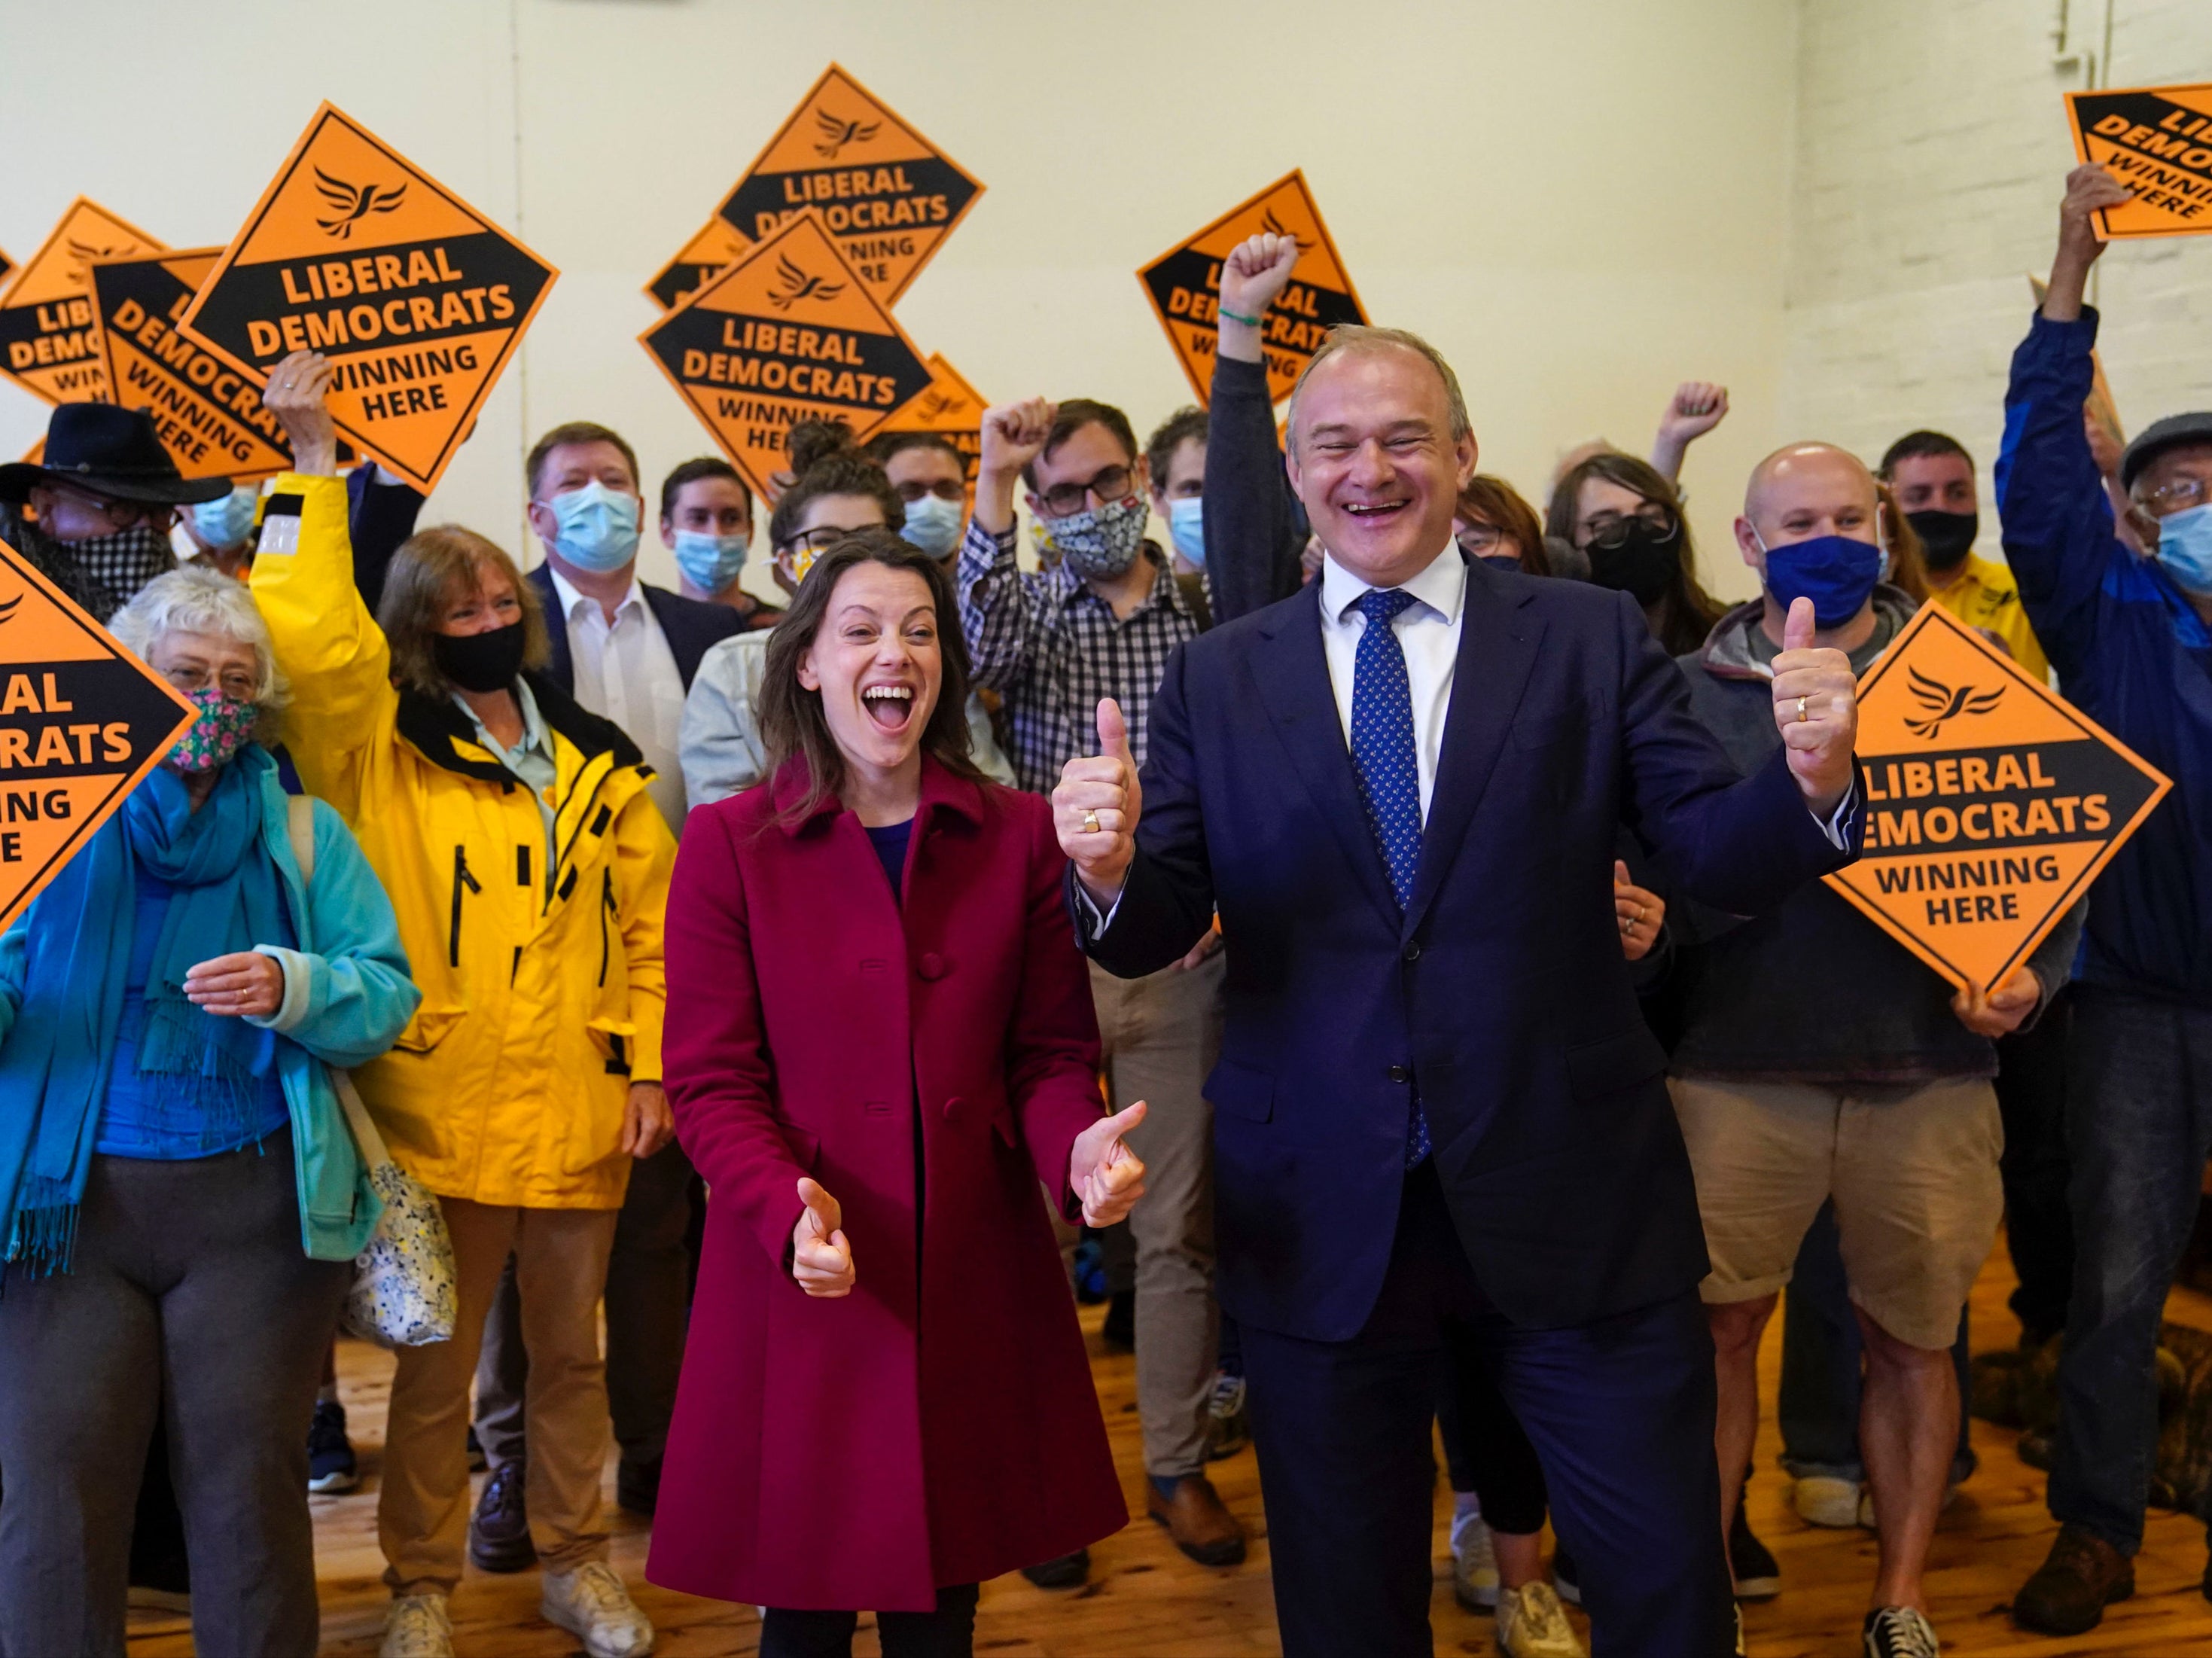 Liberal Democrat leader Ed Davey and Sarah Green, the party’s new MP for Chesham and Amersham, celebrate her by-election victory on Friday